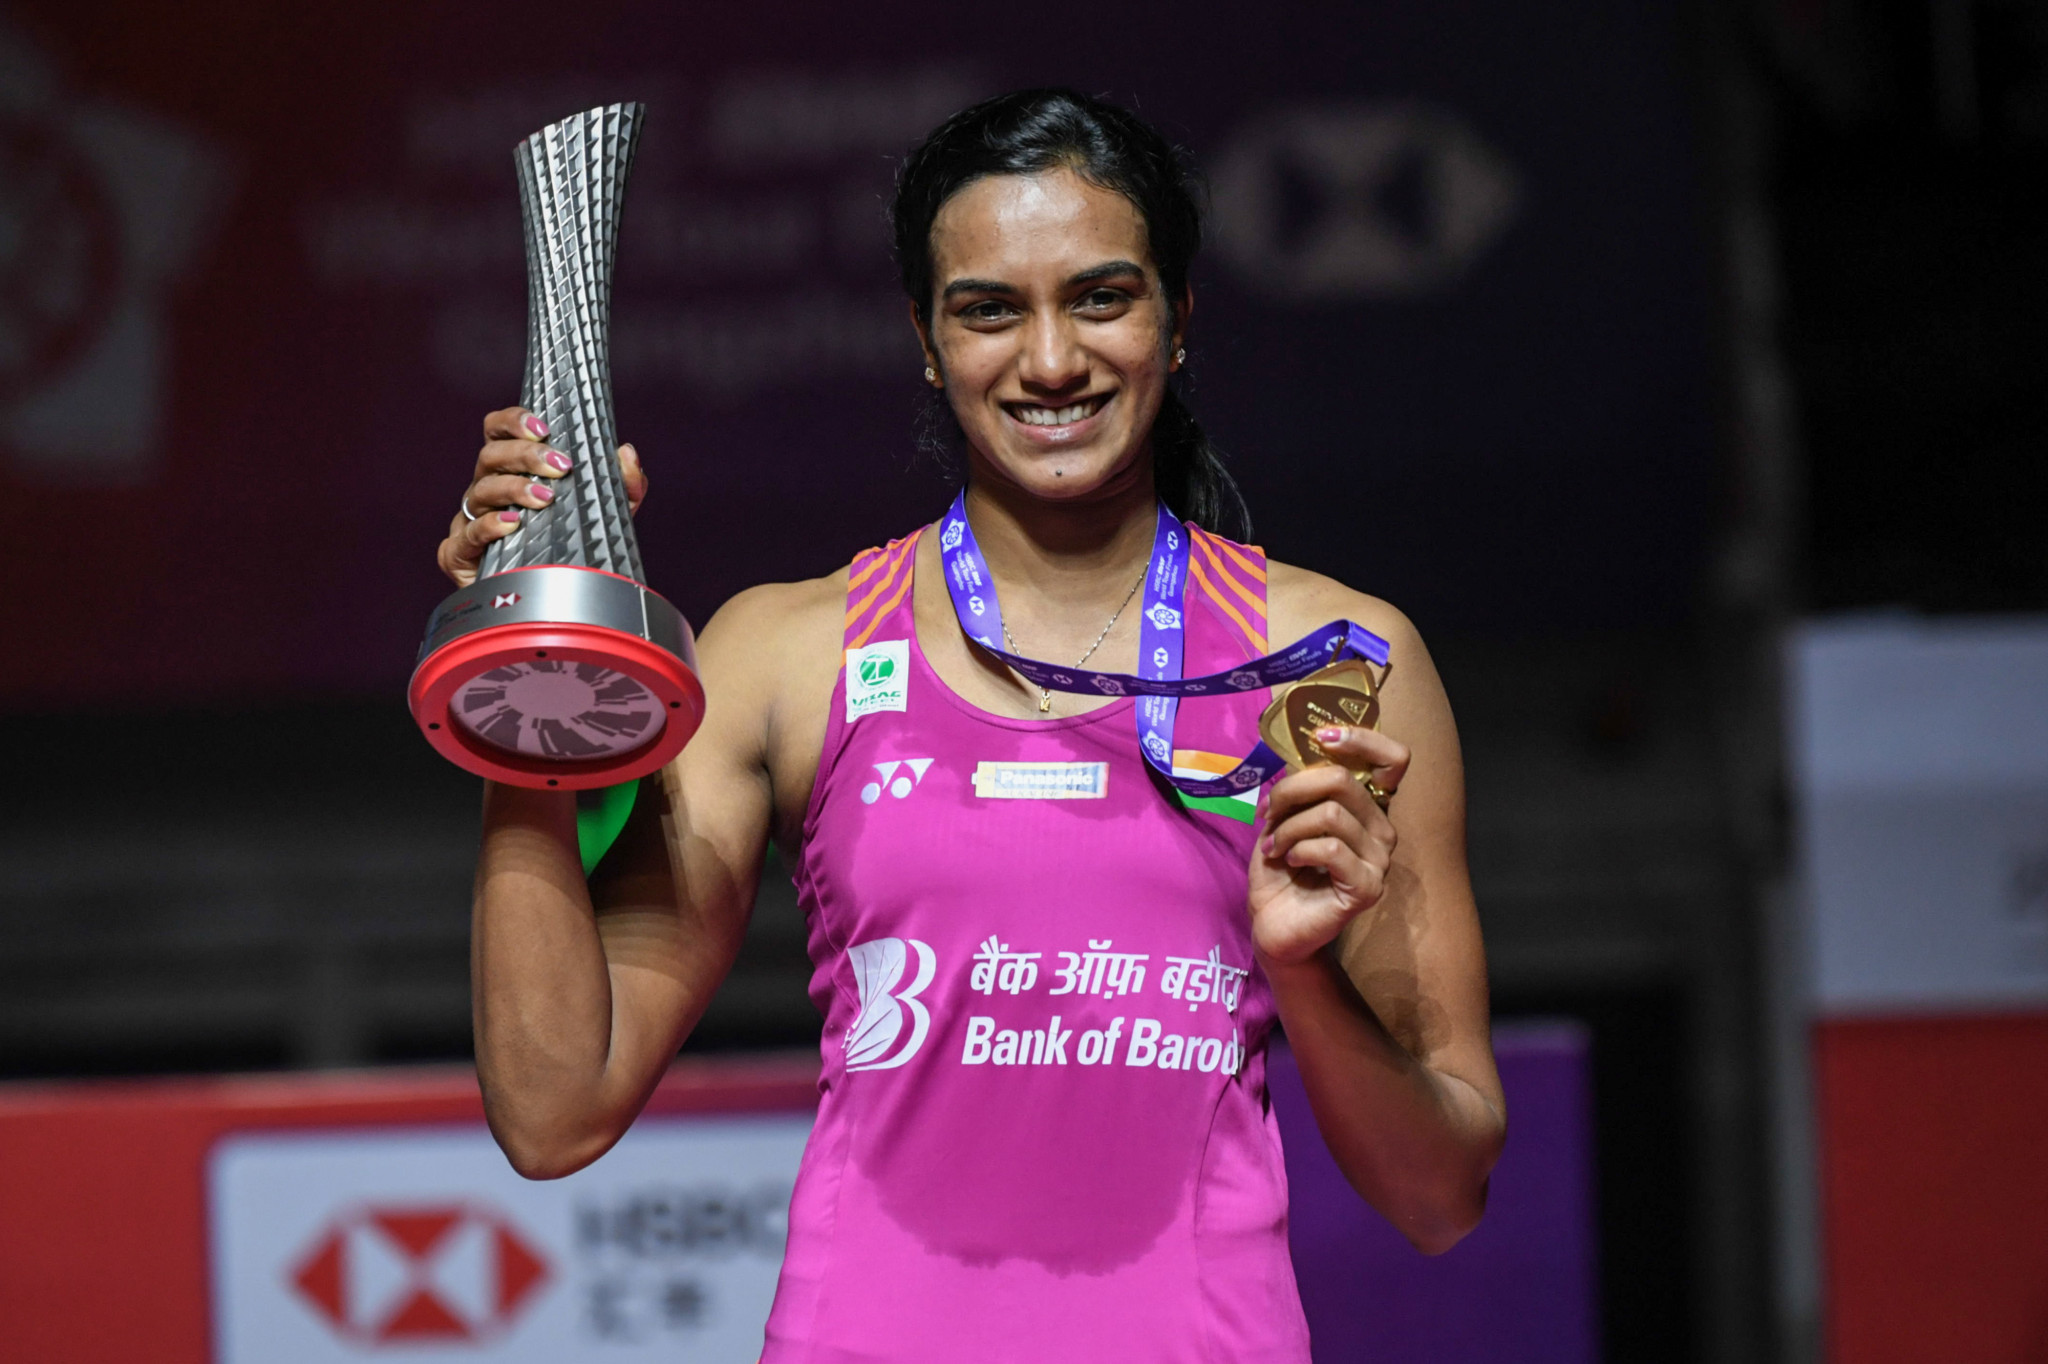 India's P V Sindhu won the women's singles title today at the BWF World Tour Finals in Guangzhou ©Getty Images